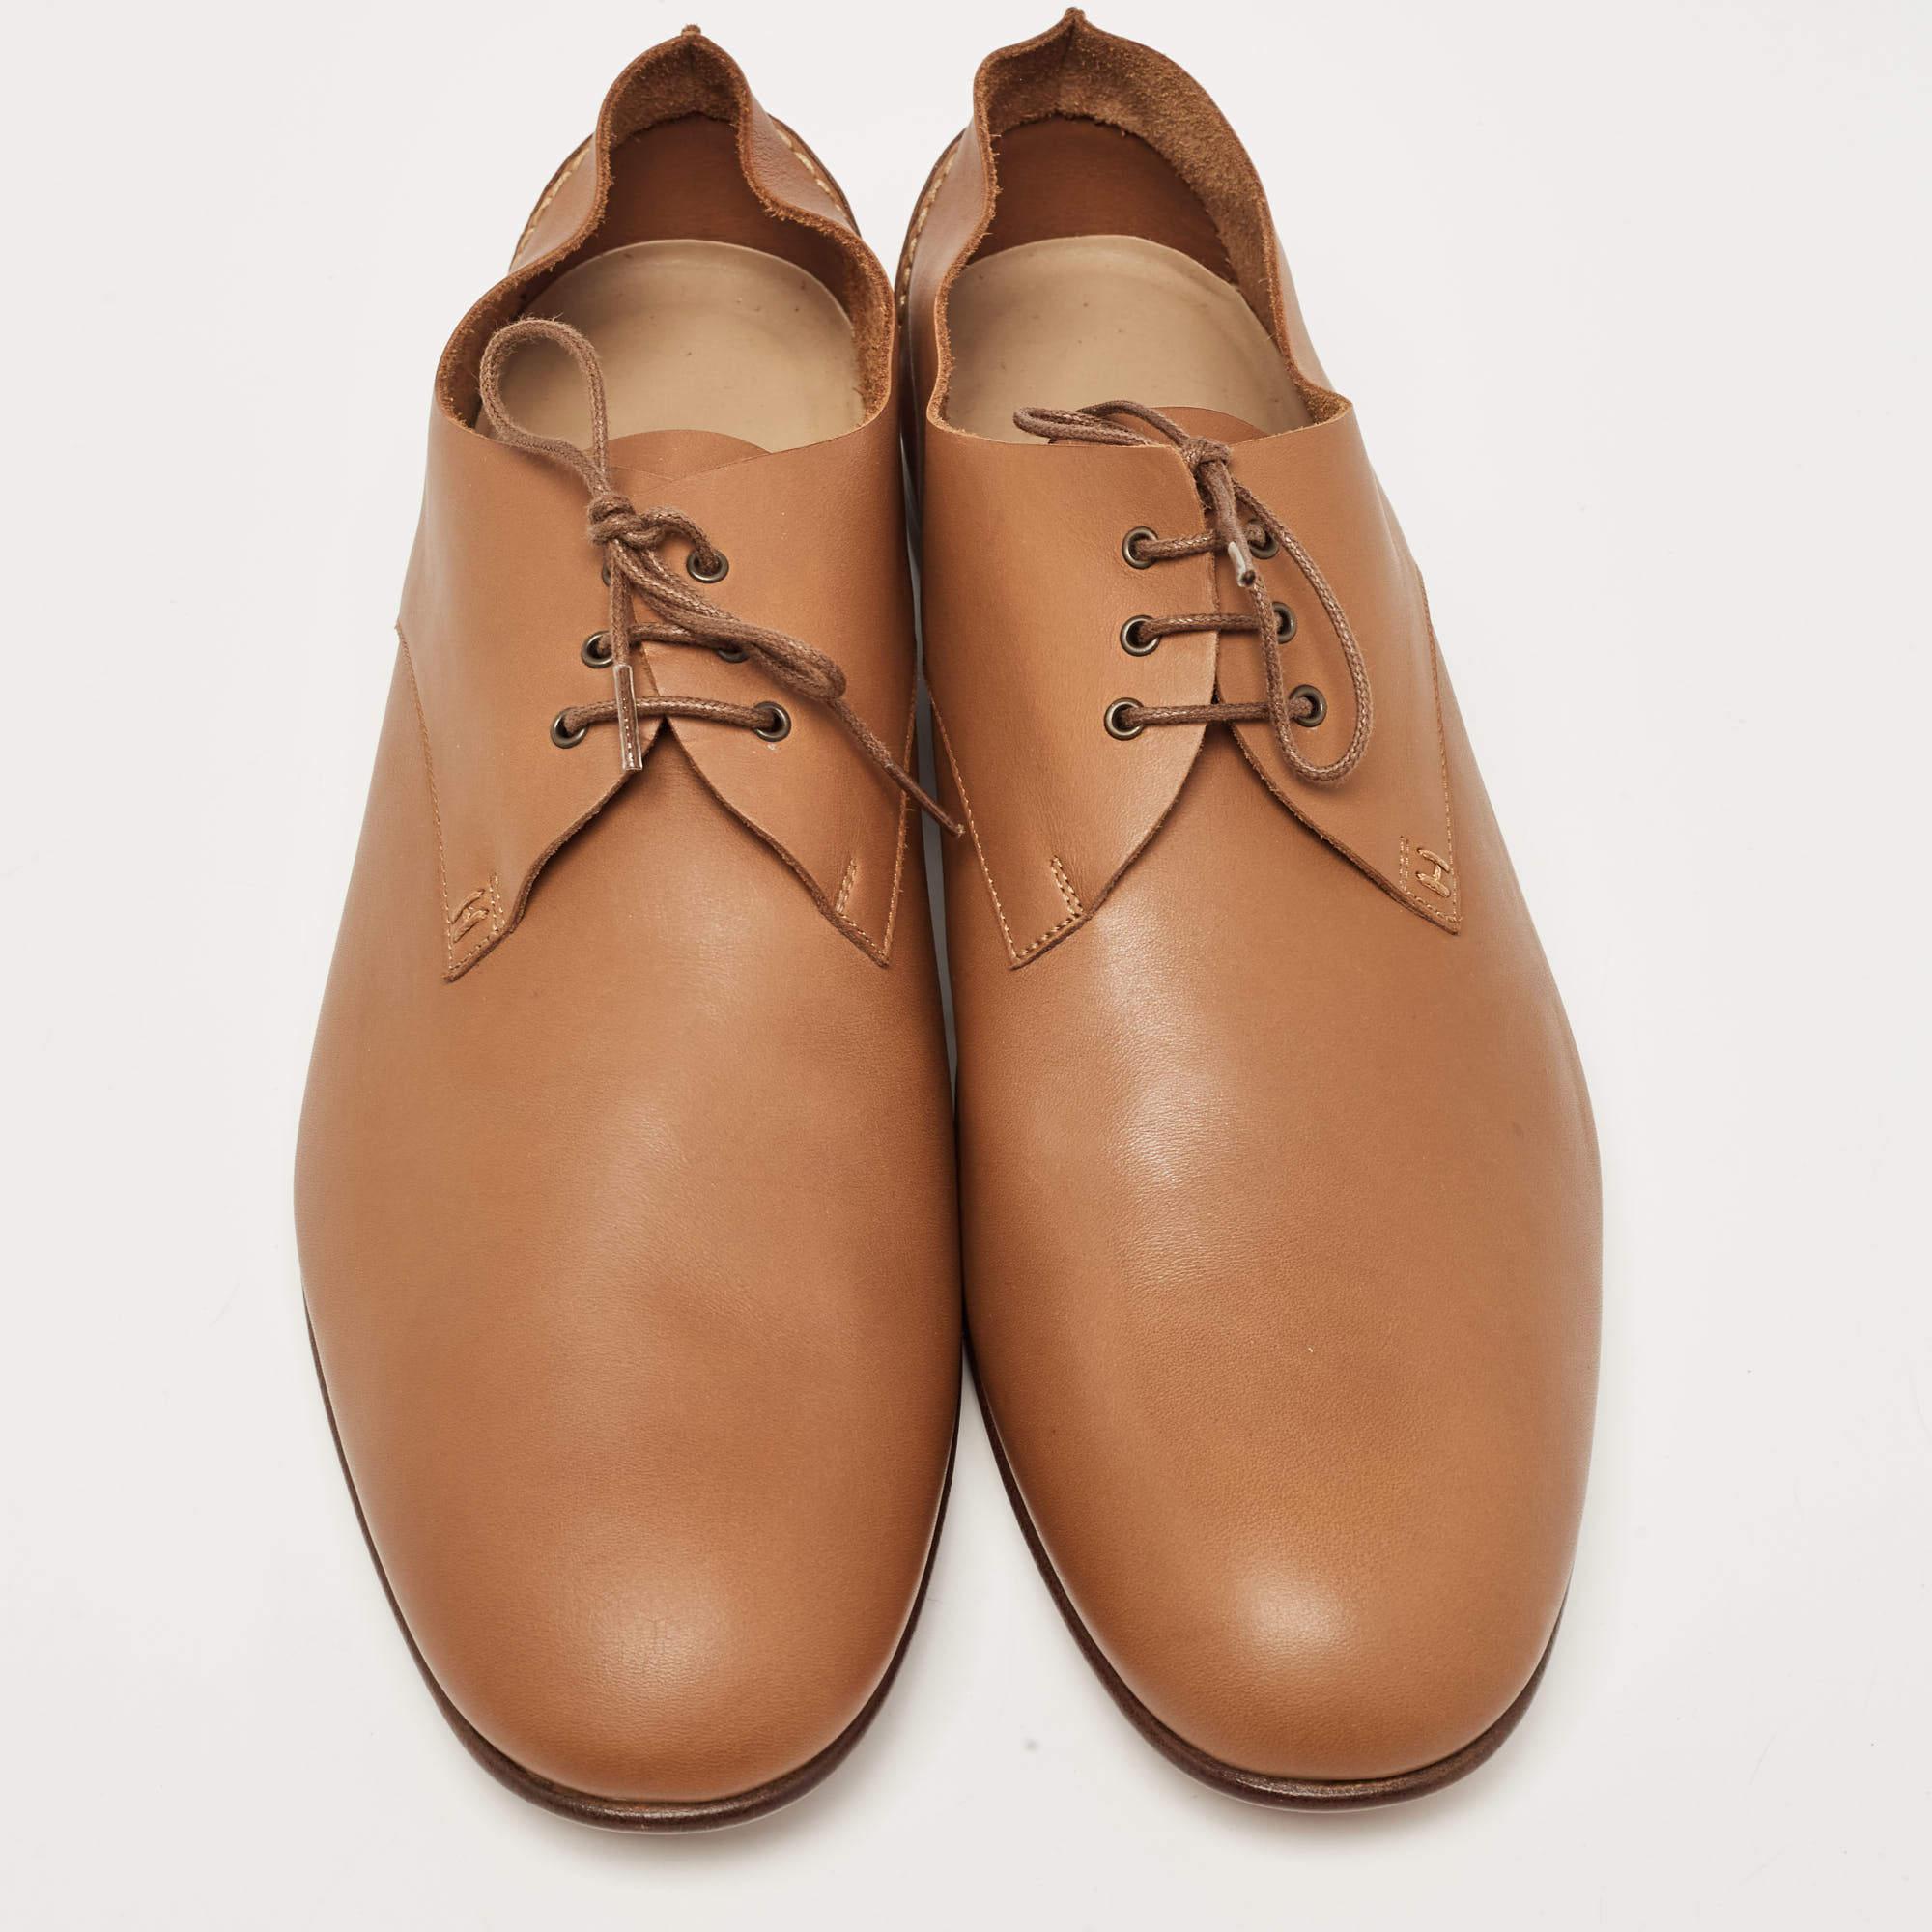 These Hermes derby shoes aim to deliver a fashionable result. Constructed using brown leather and secured with laces, these shoes are as durable as they are appealing.

Includes
Original Dustbag, Original Box, Info Booklet